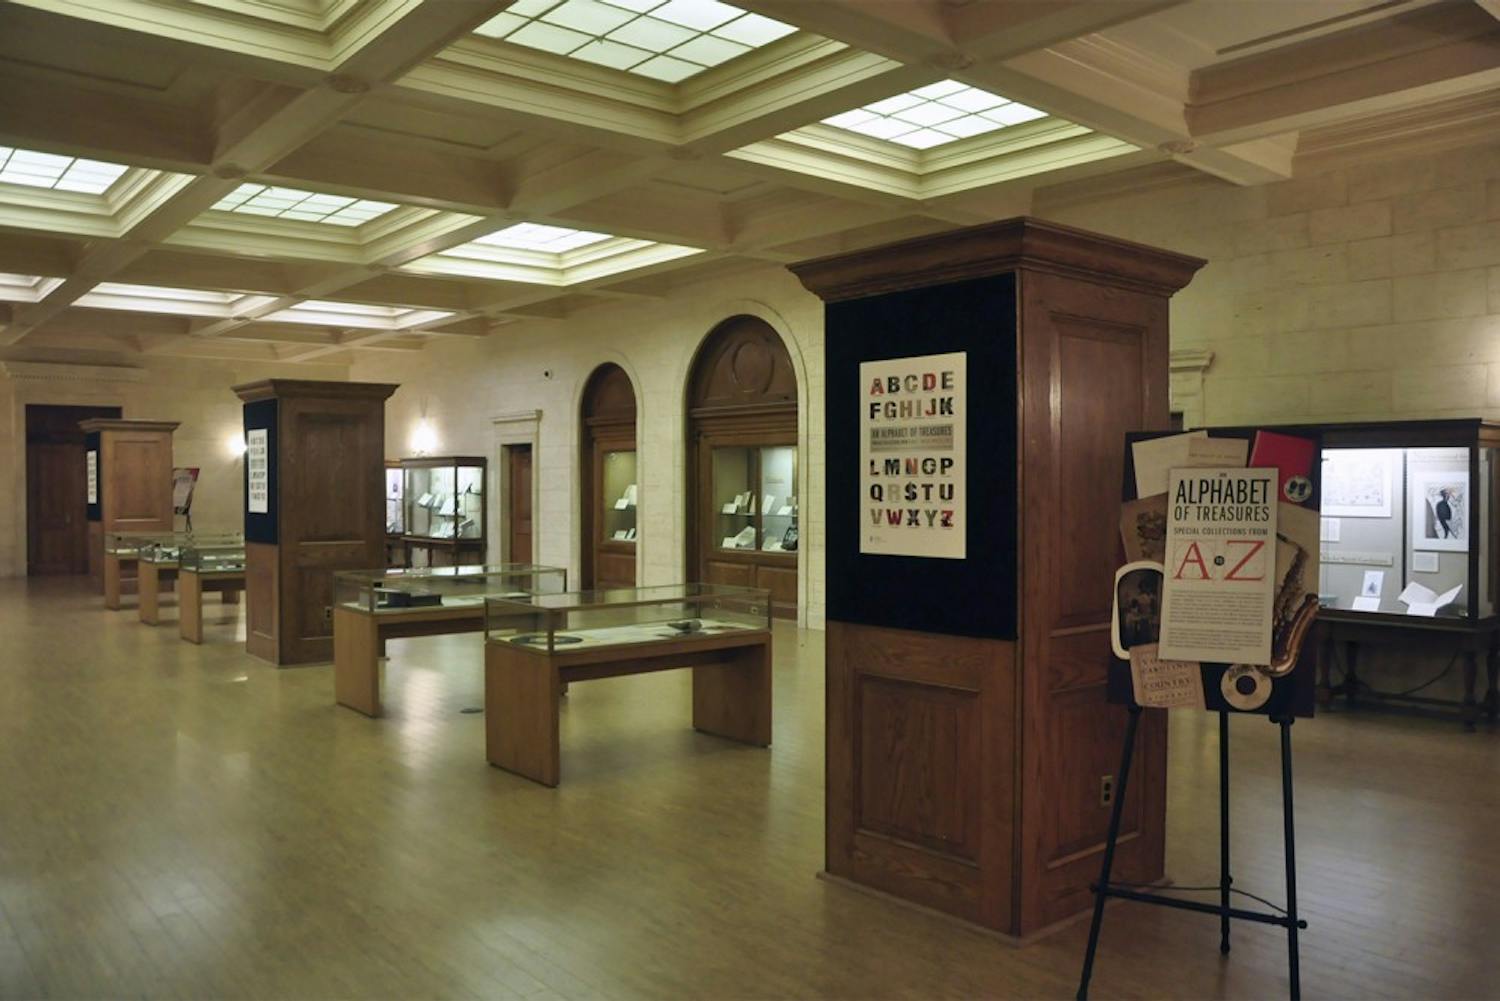 “An Alphabet of Treasures: Special Collections from A to Z,” an exhibit now on  display in Wilson Library, includes a range of artifacts for students to explore.